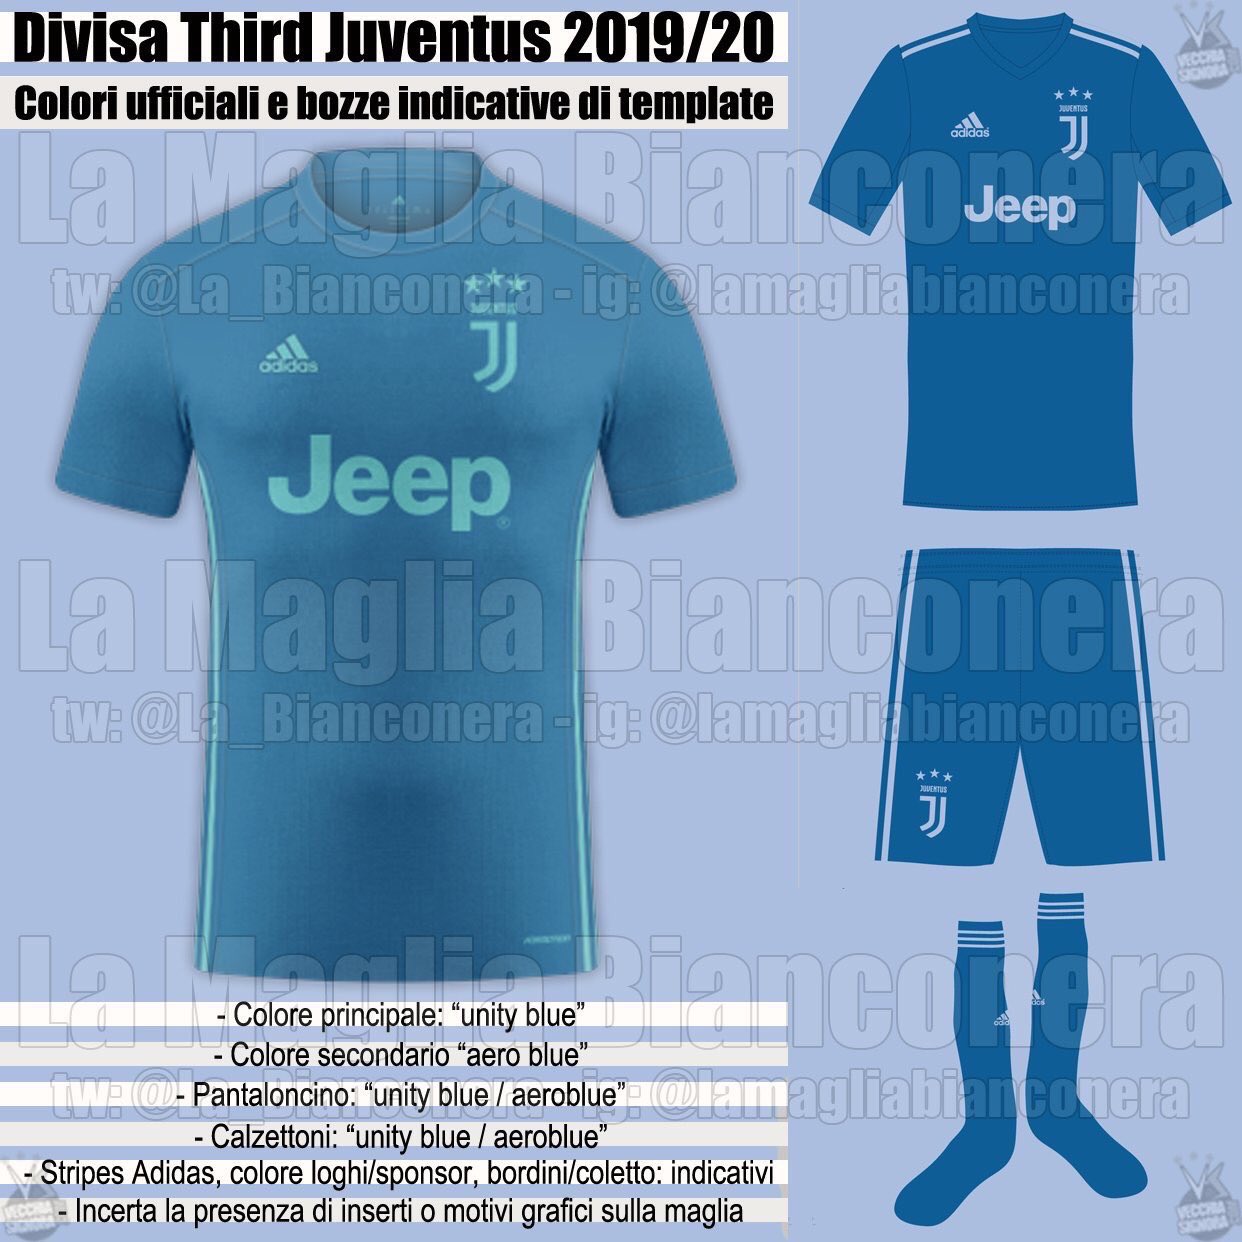 Around Turin on Twitter: "Colors are official, the design not yet but very  probable. Enjoy the Juventus kits 2019/20 by @La_Bianconera  https://t.co/yOJ0ANmrFG" / Twitter